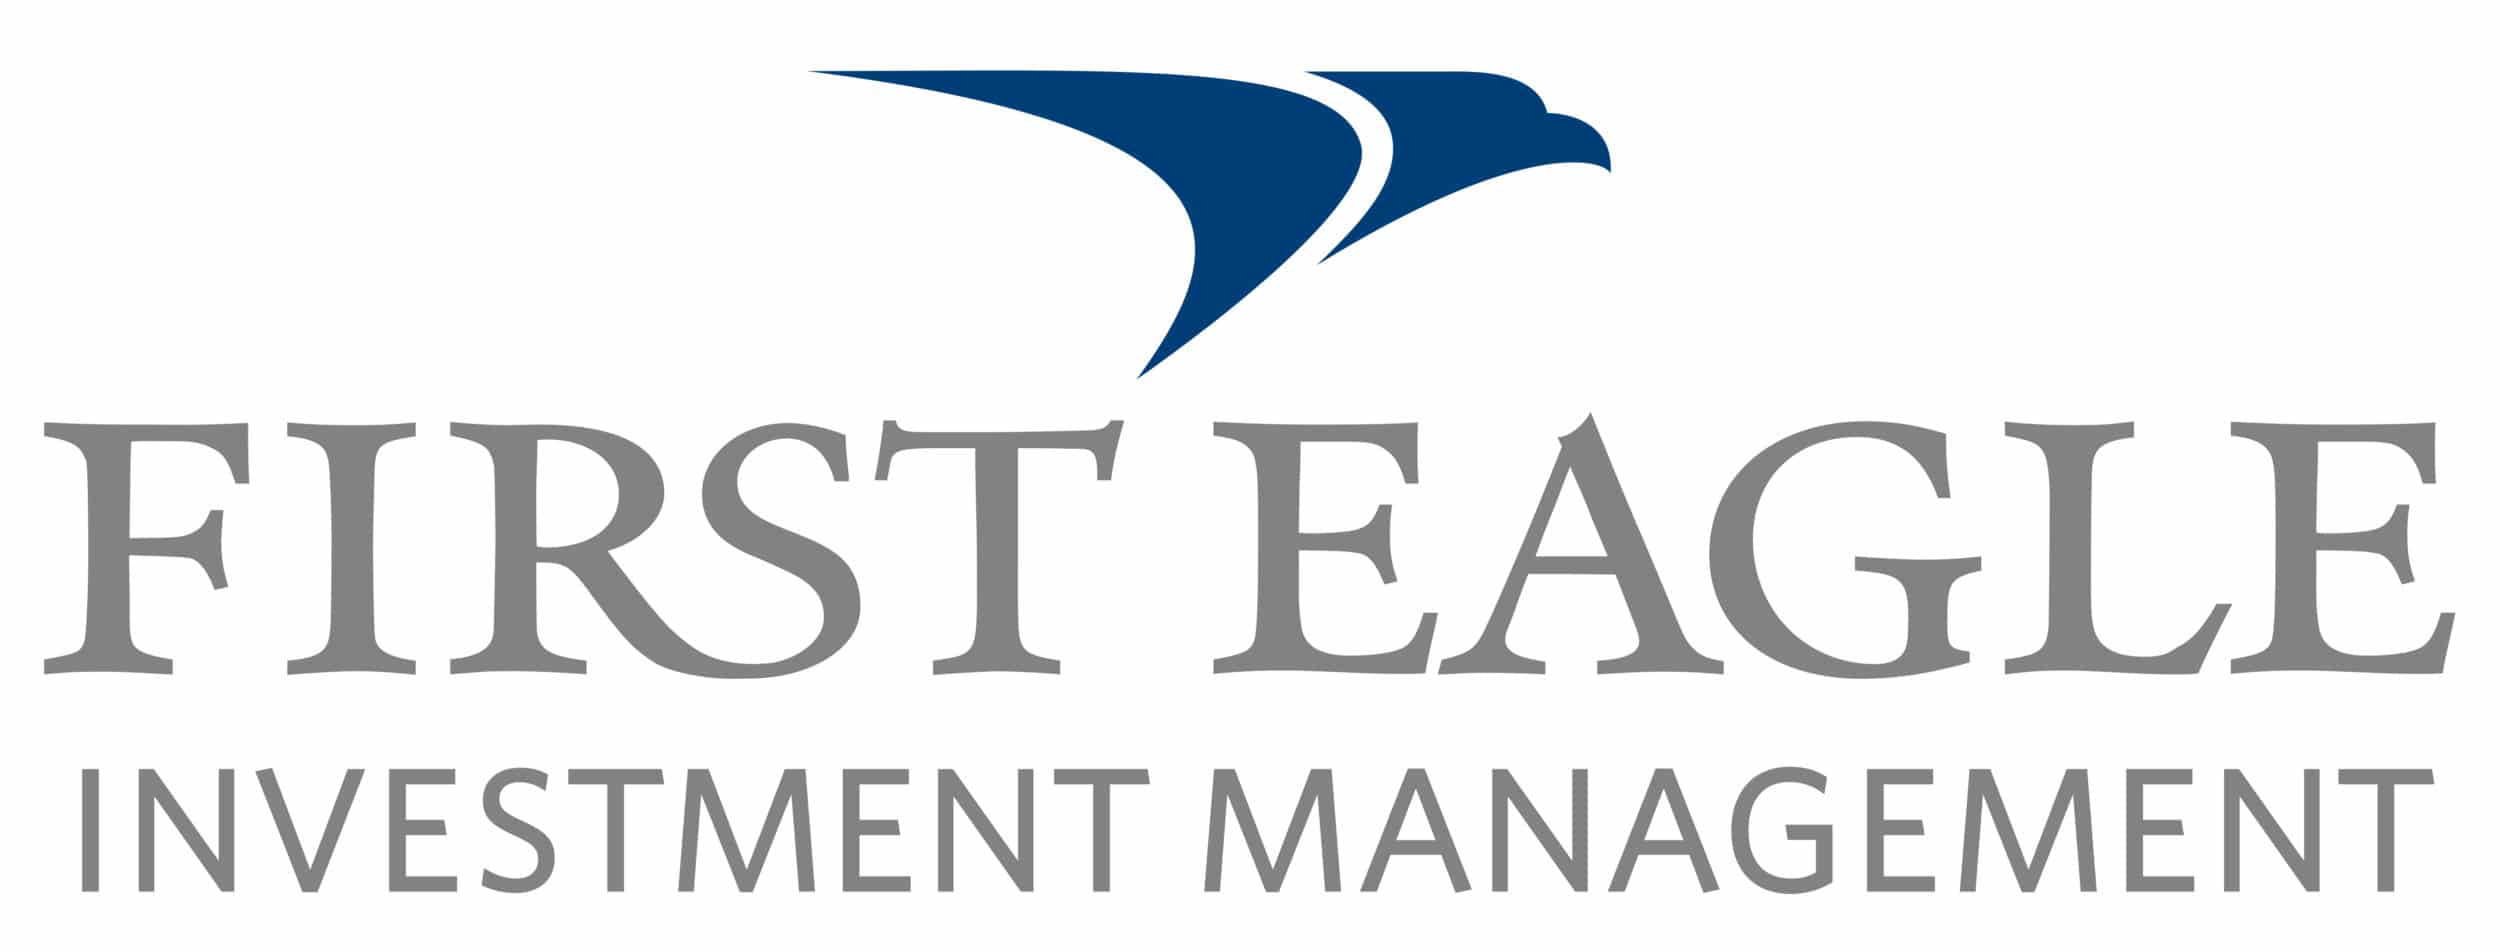 First Eagle Logo - First Eagle Investment Logo - Child Abuse Prevention Center